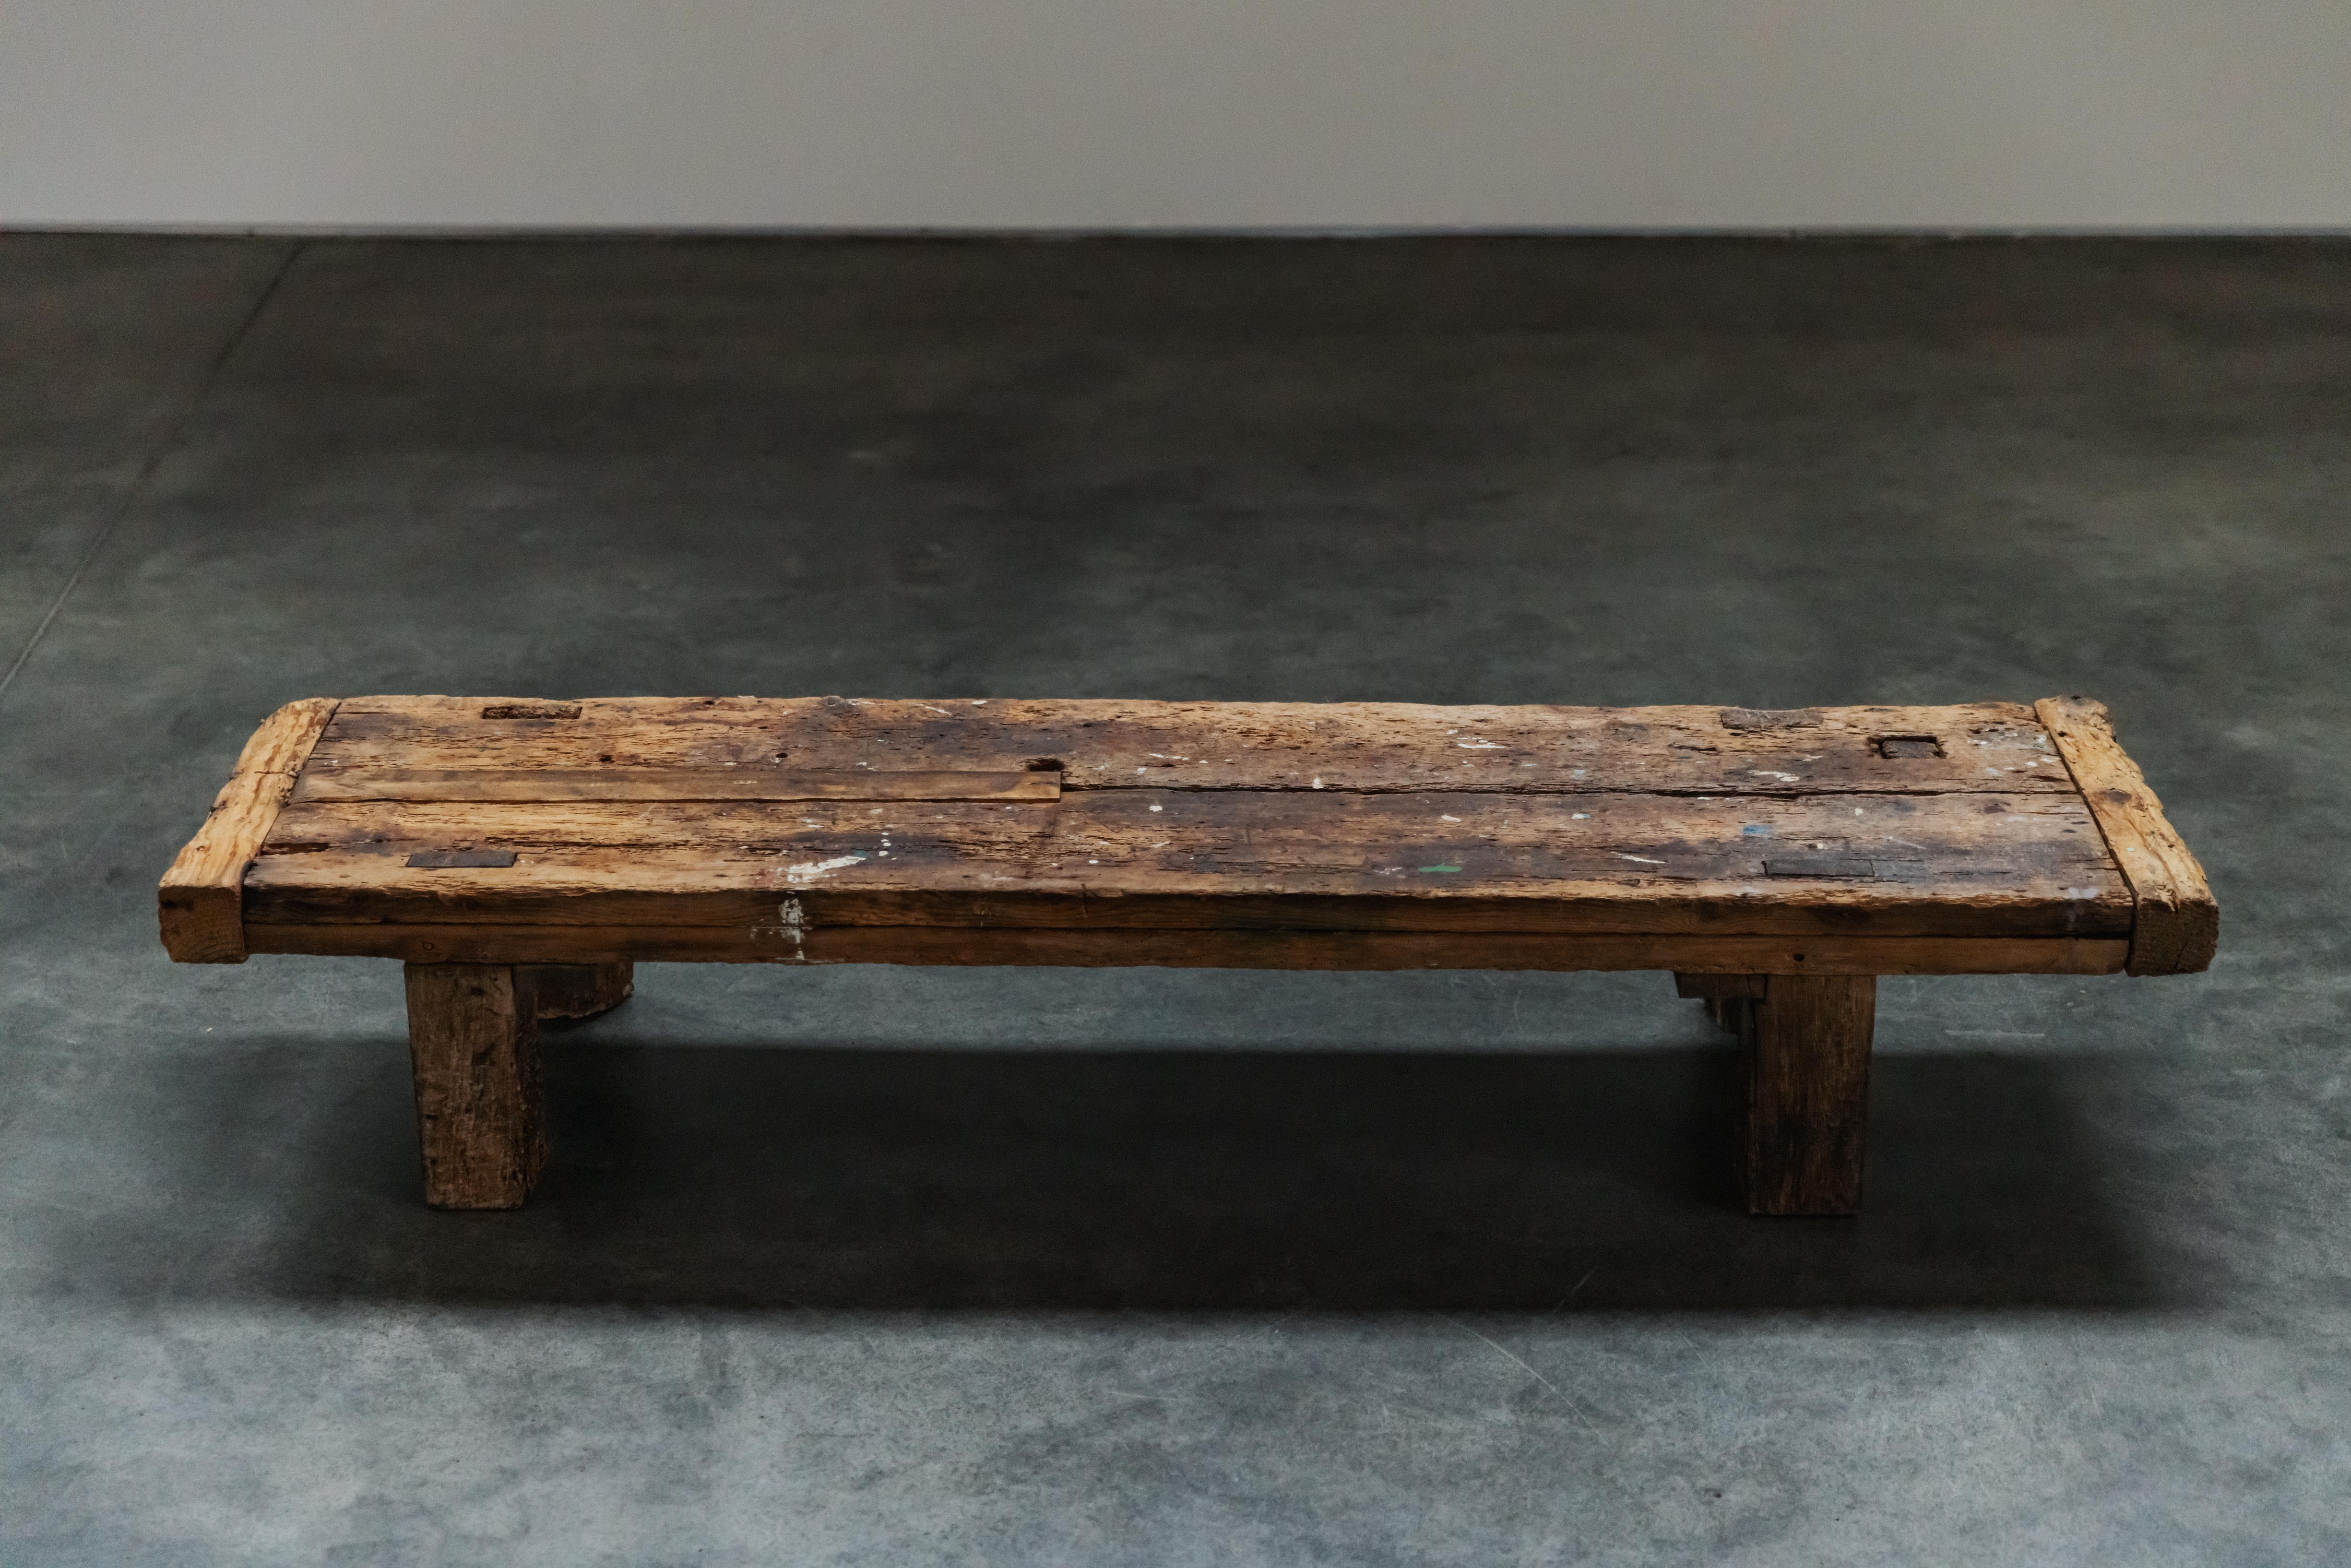 Primitive Work Bench Coffee Table From France, Circa 1900.  Solid pine construction with nice patina and wear.